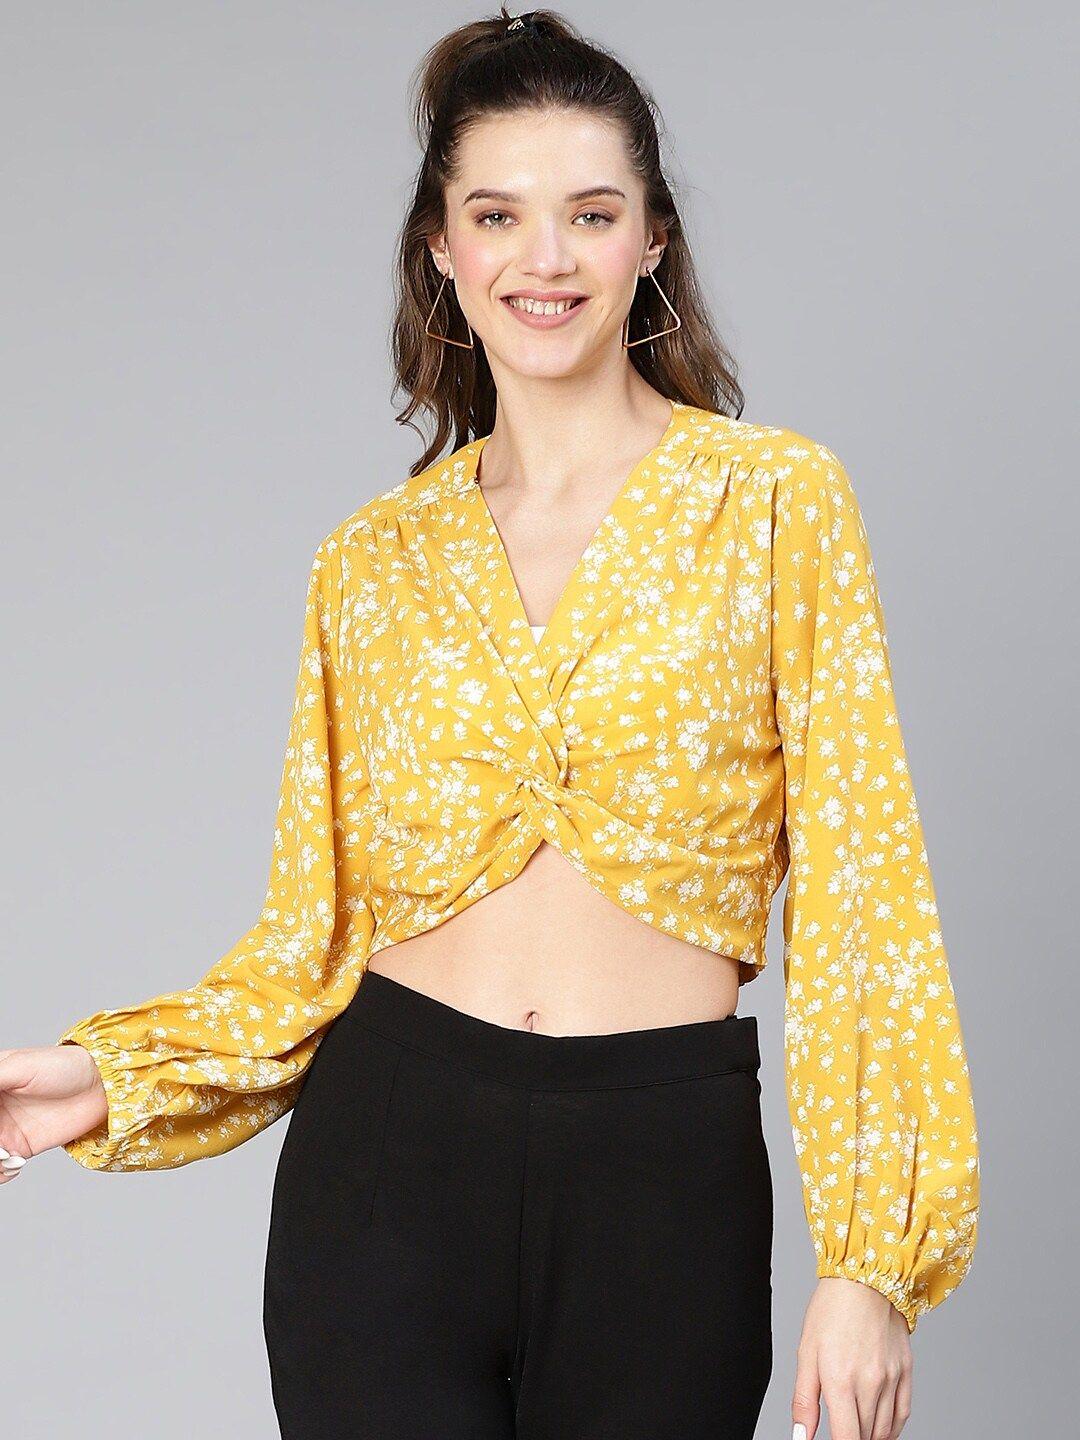 oxolloxo-floral-printed-knotted-crop-top